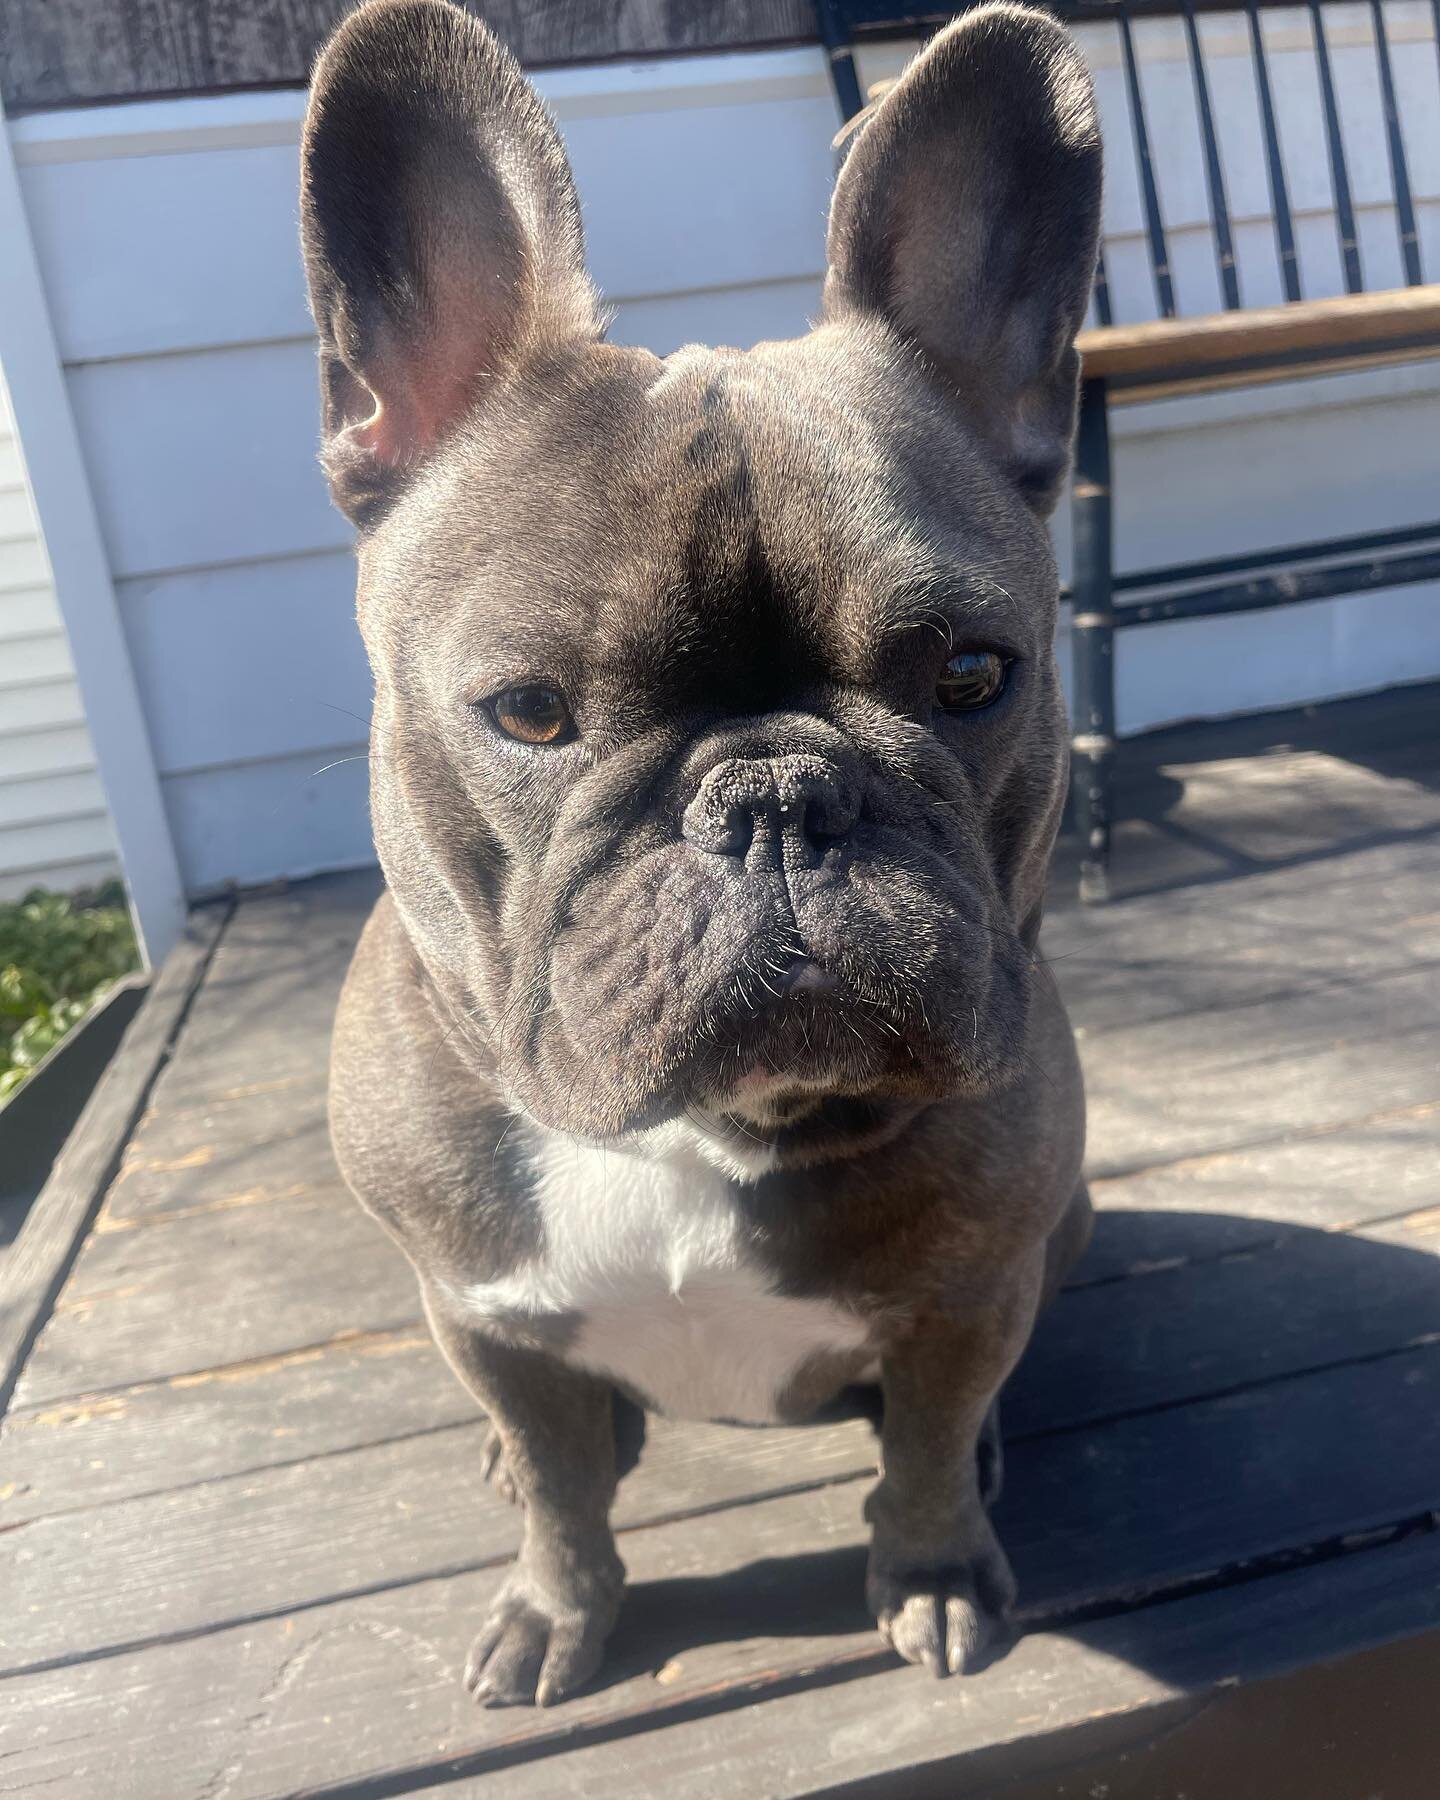 Bruce smells spring is in the air&hellip;.. at least for the next 12 hours! 
.
.
.
.
.
.
.
.
.
.
.
.
#dogwaukee #puppiesofinstagram #homeschool #mentalhealth #training #milwaukee #wisconsin #goodboy #frenchie #bulldog #french #dogsofinstagram #modeli